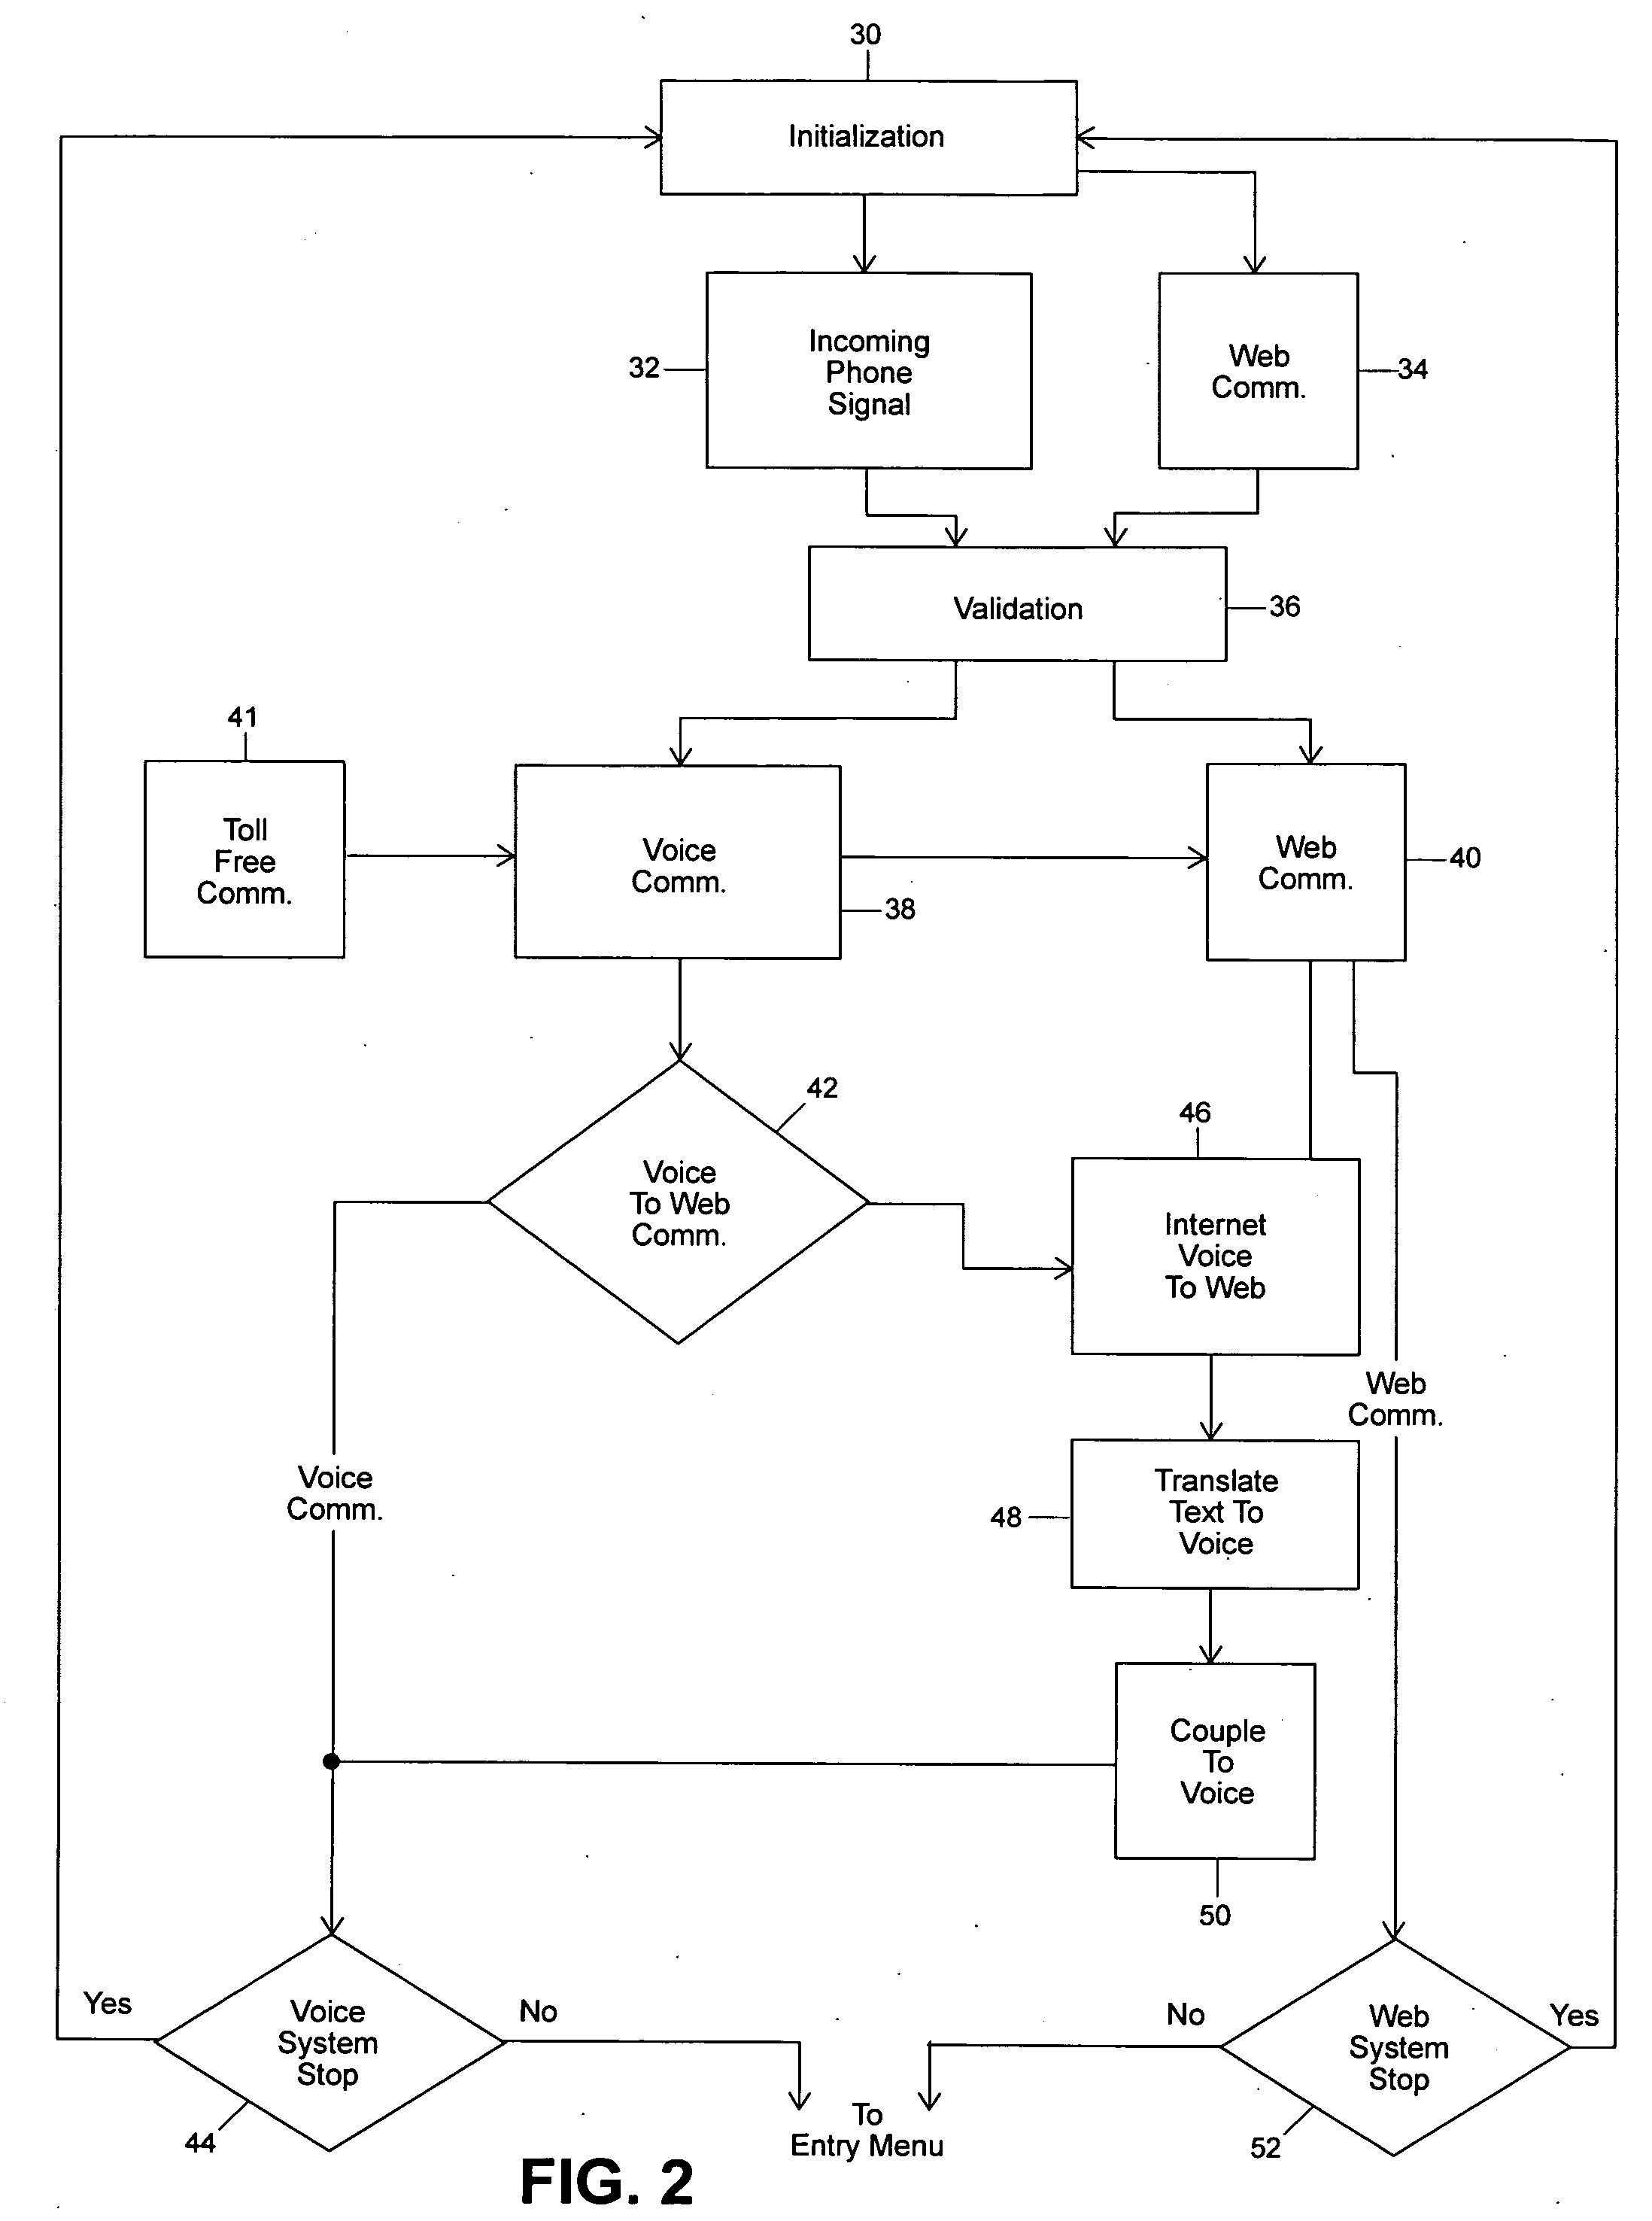 Computer algorithm and method for facilitating the networking of individuals